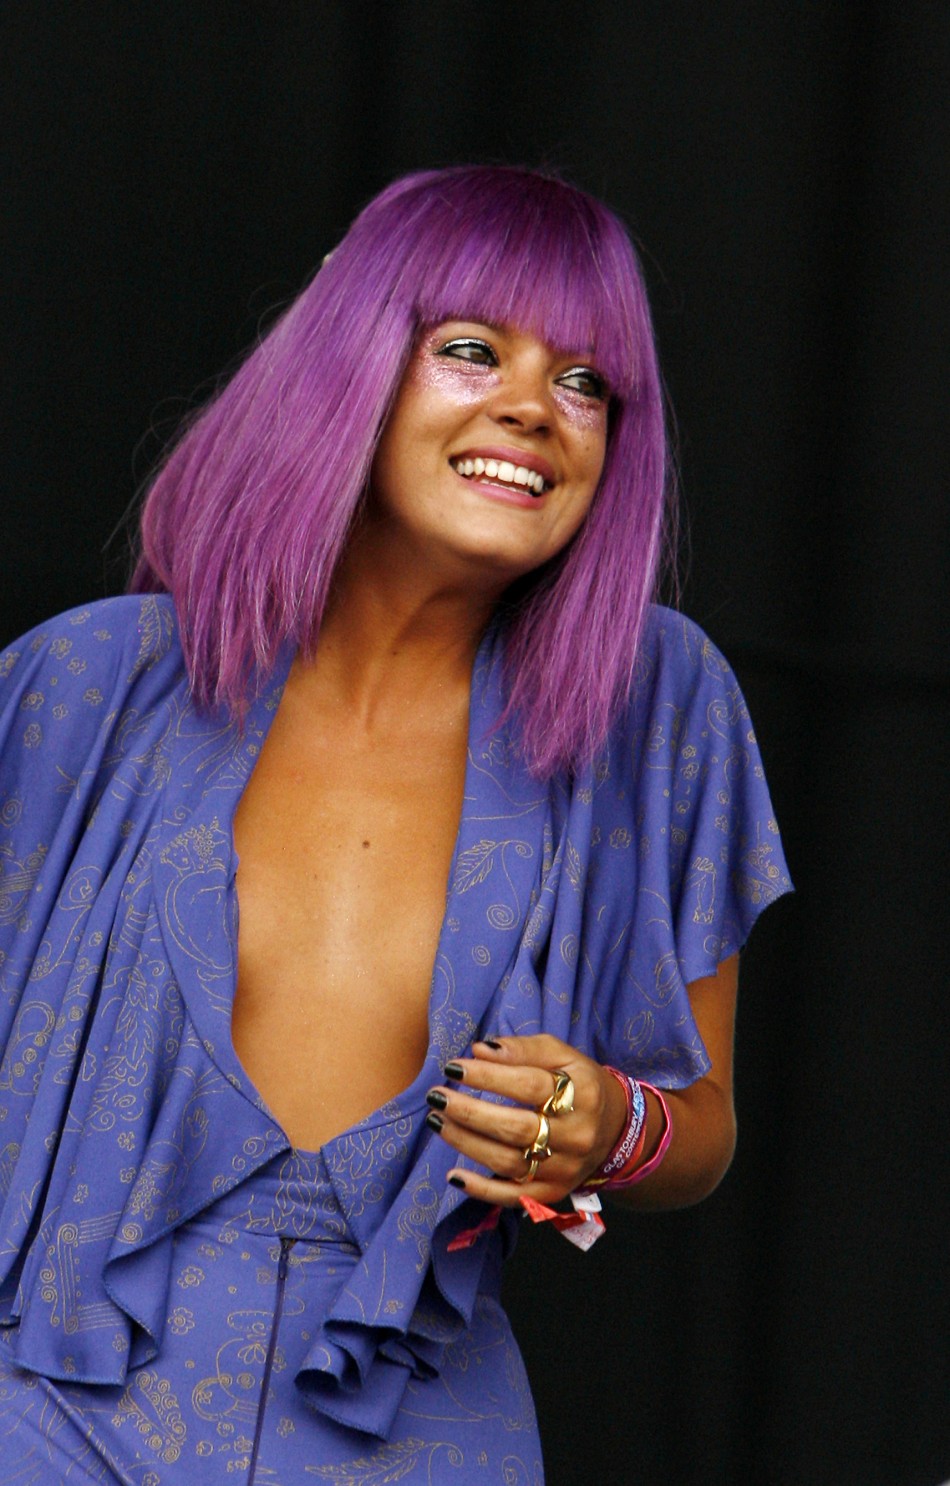 British singer Lily Allen performs at the Glastonbury Festival 2009 in south west England